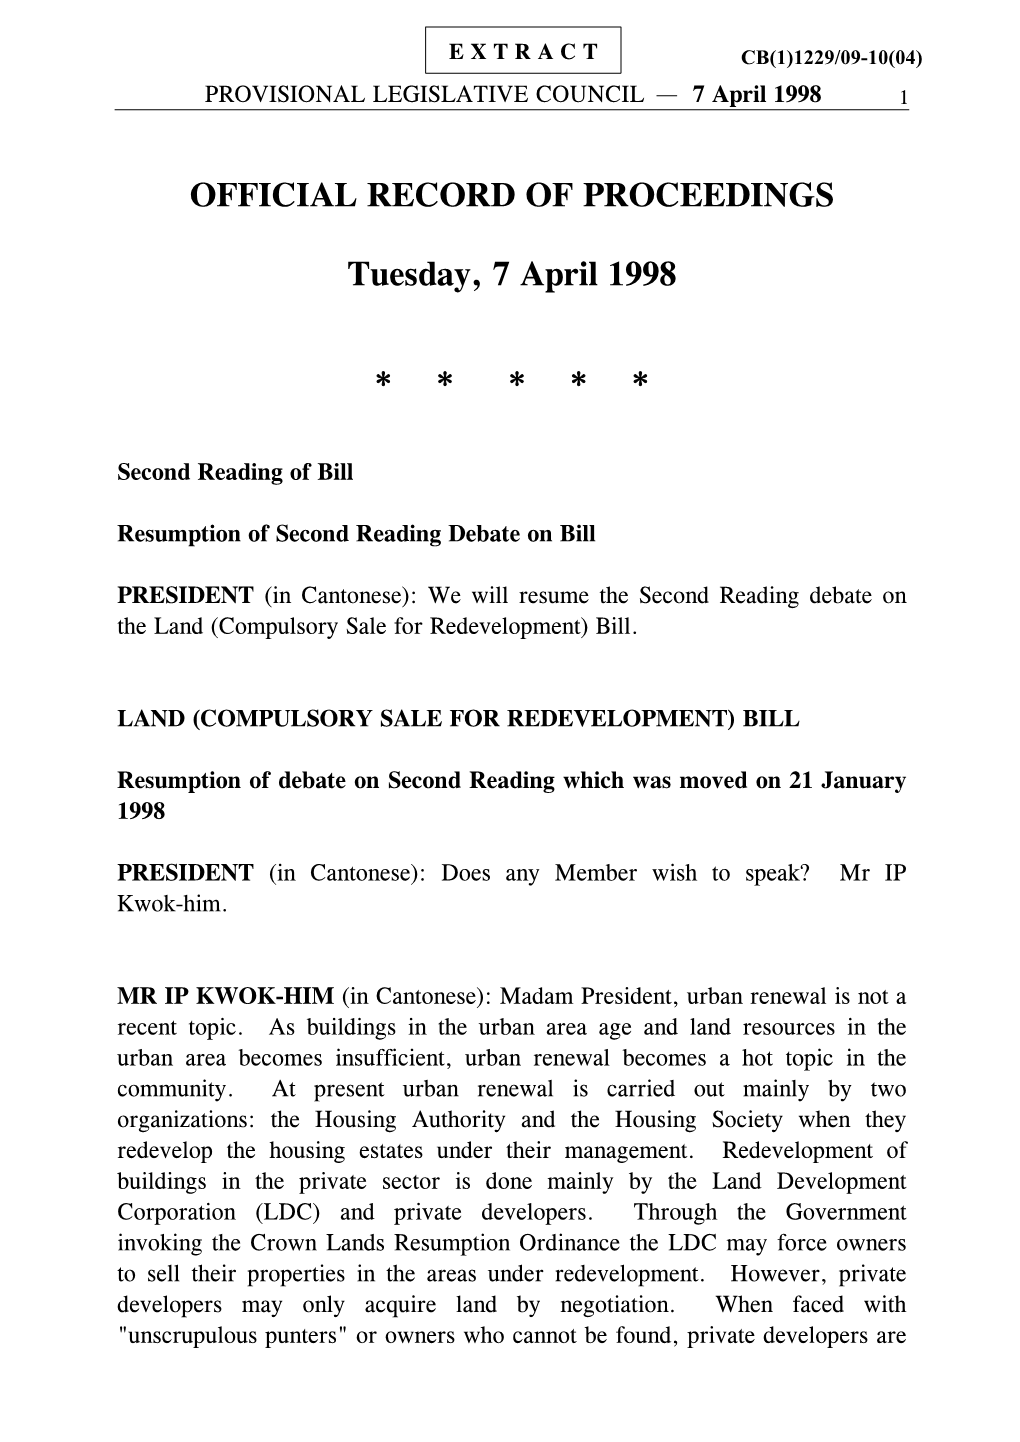 OFFICIAL RECORD of PROCEEDINGS Tuesday, 7 April 1998